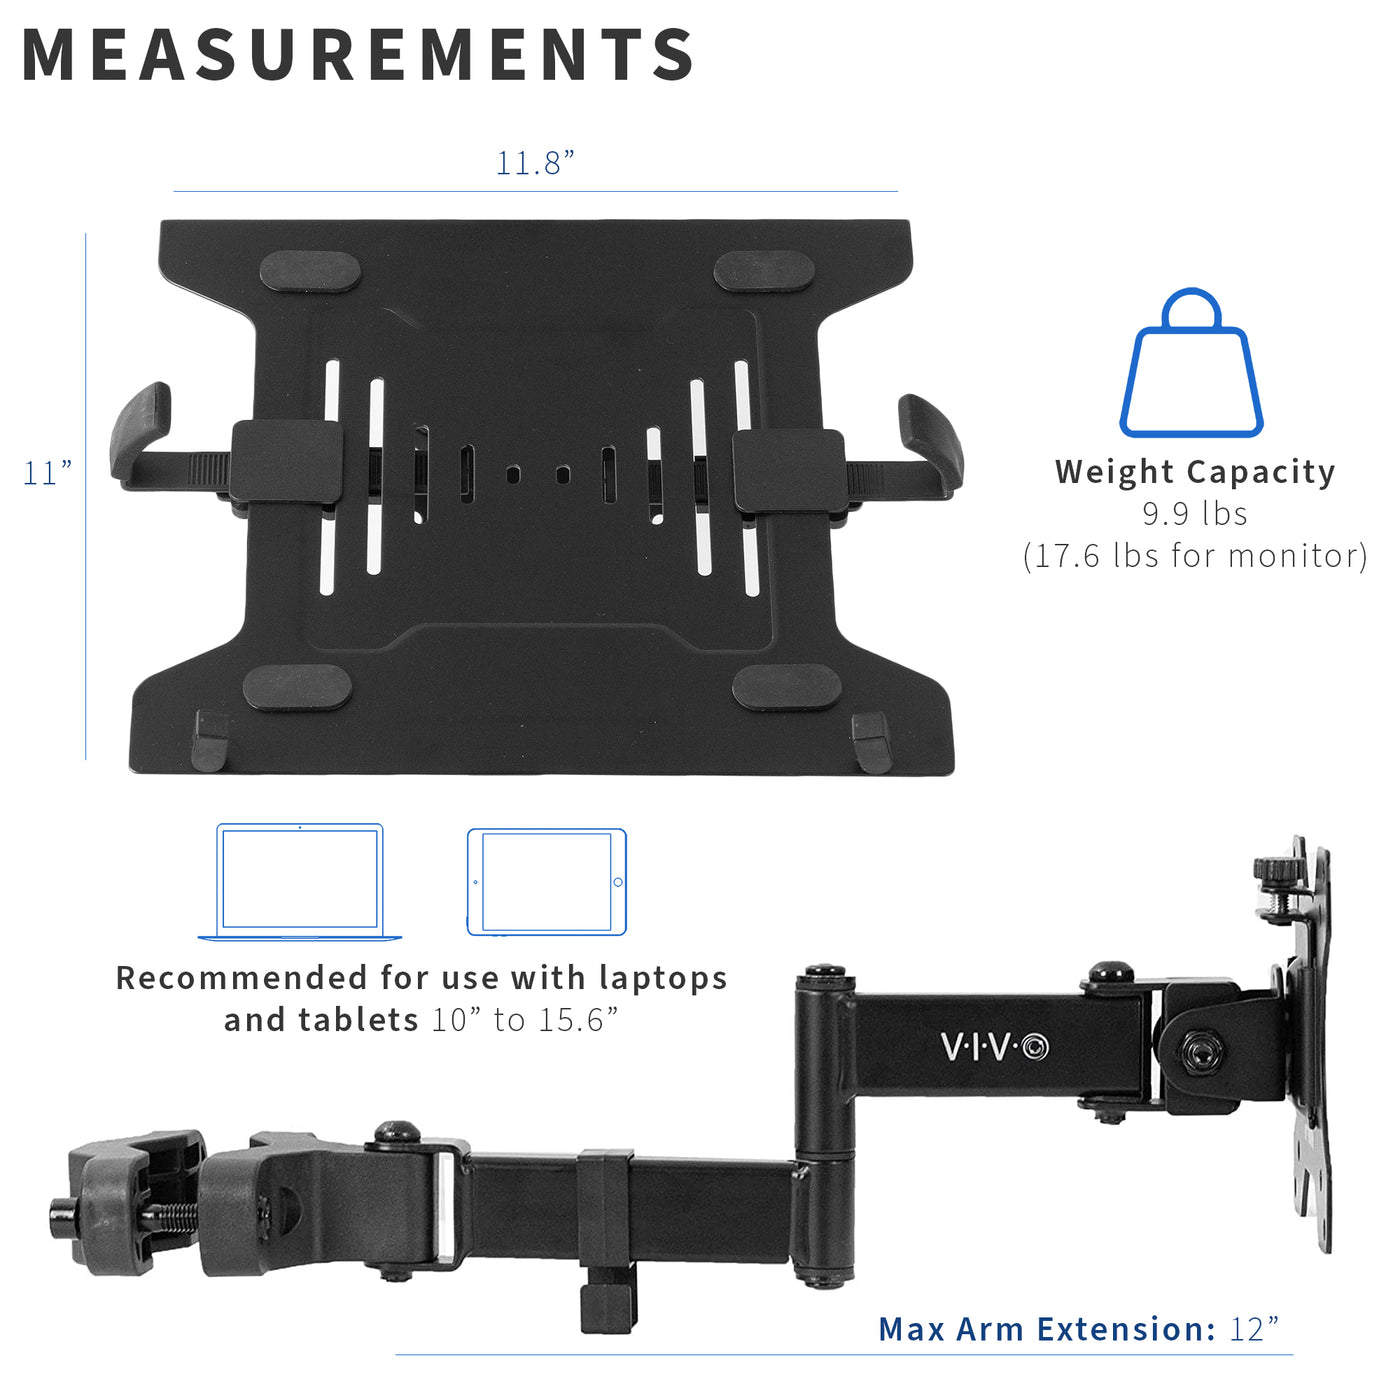 Measurements, specifications, and compatibility of adjustable pole mount laptop arm.